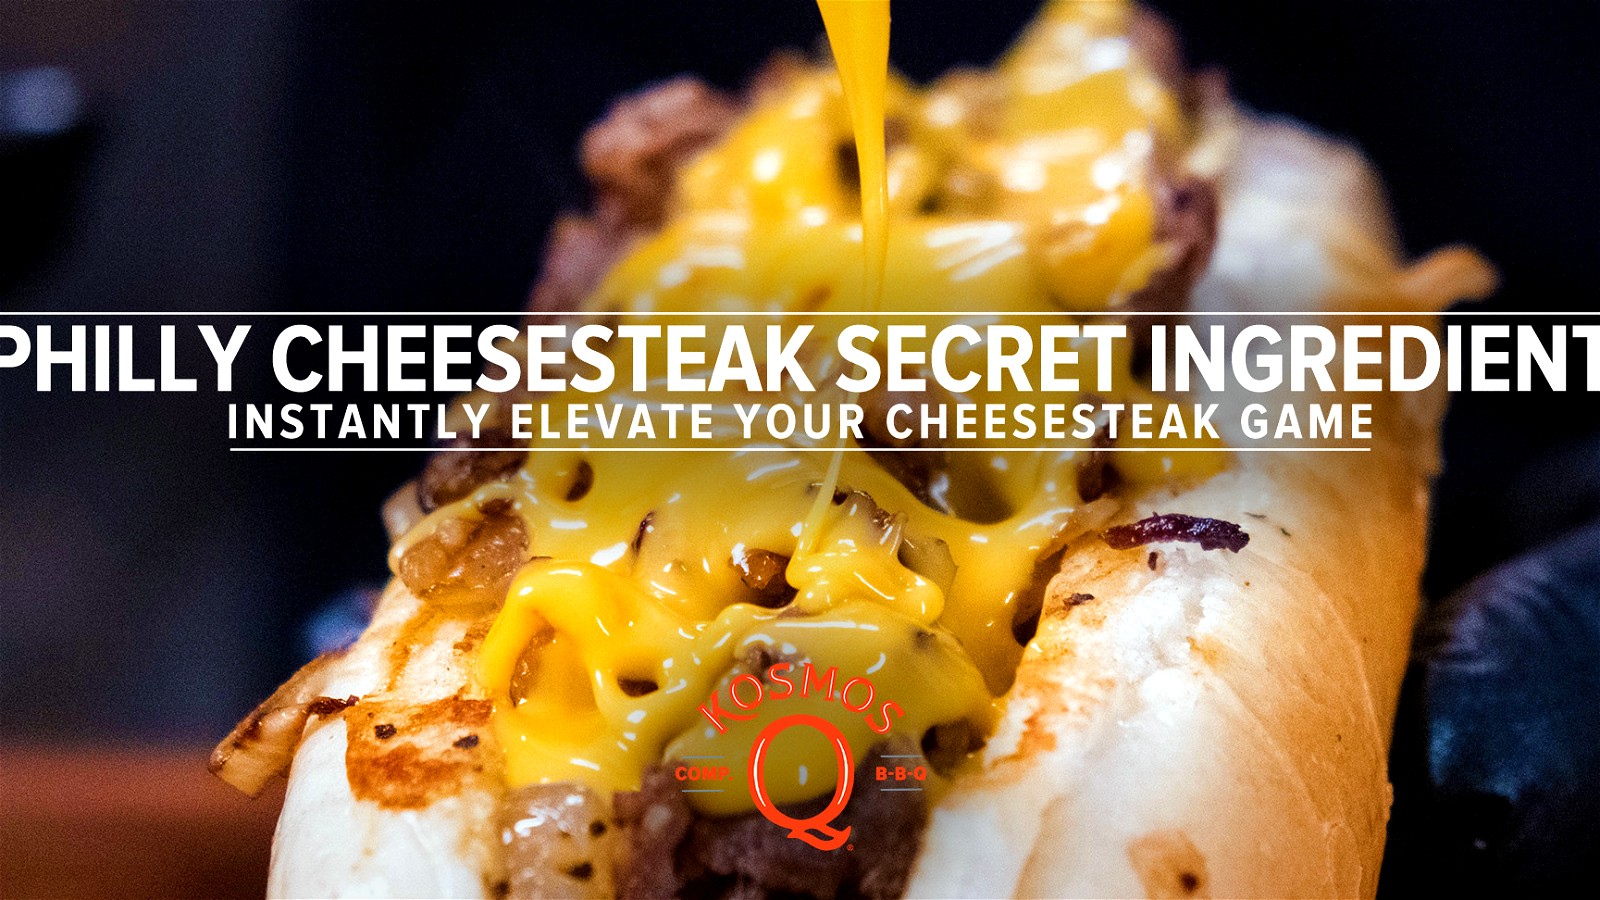 Image of The Ultimate Philly Cheesesteak Secret Ingredient